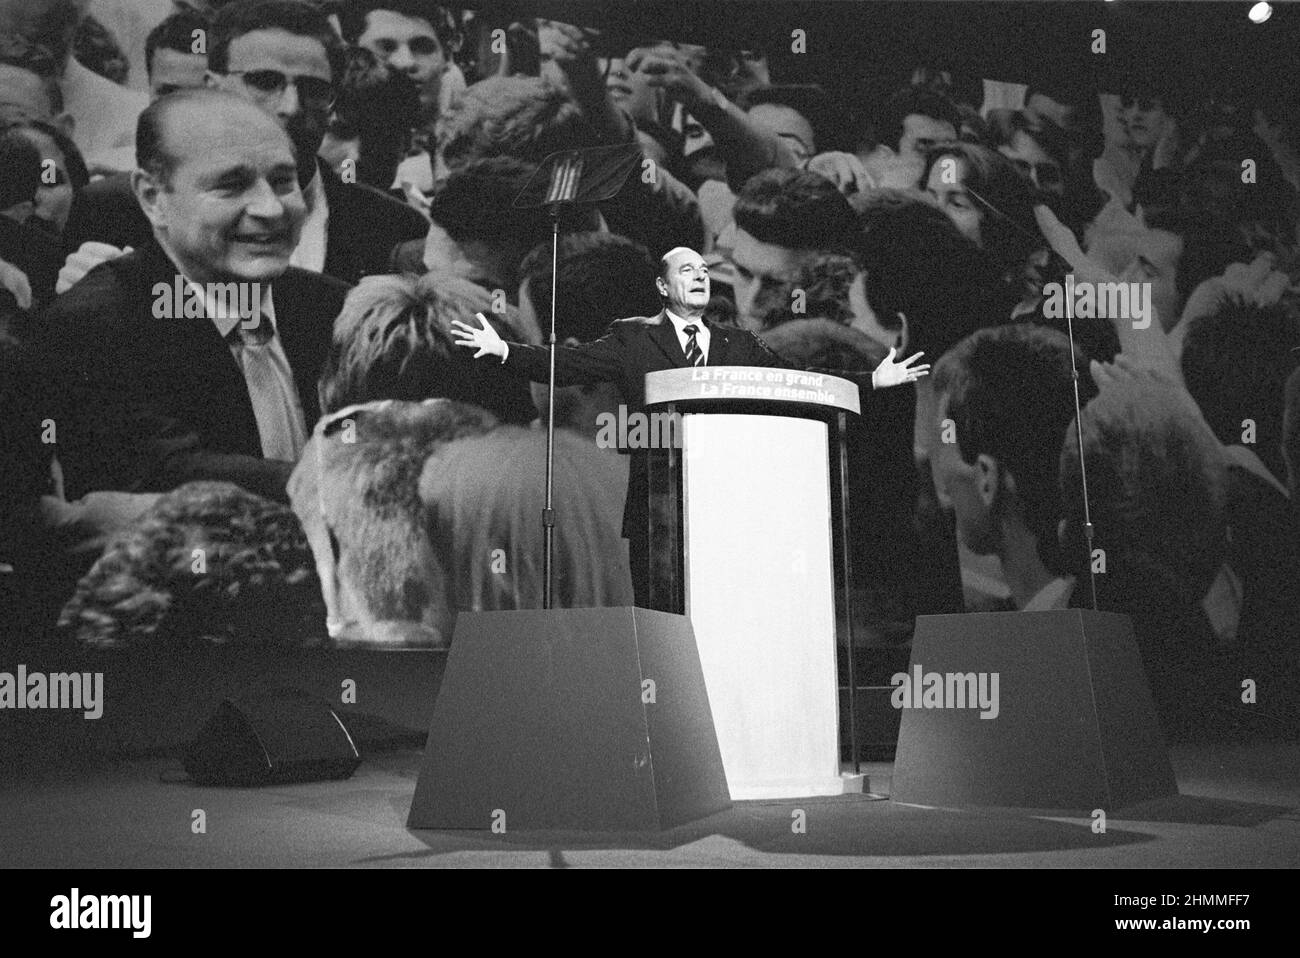 Lyon (central-eastern France), 2002/04/25: meeting of Jacques Chirac, candidate for the presidential election, in front of 7000 people. Huge picture in the background and speech from the rostrum 'La France en grand, la France ensemble' Stock Photo